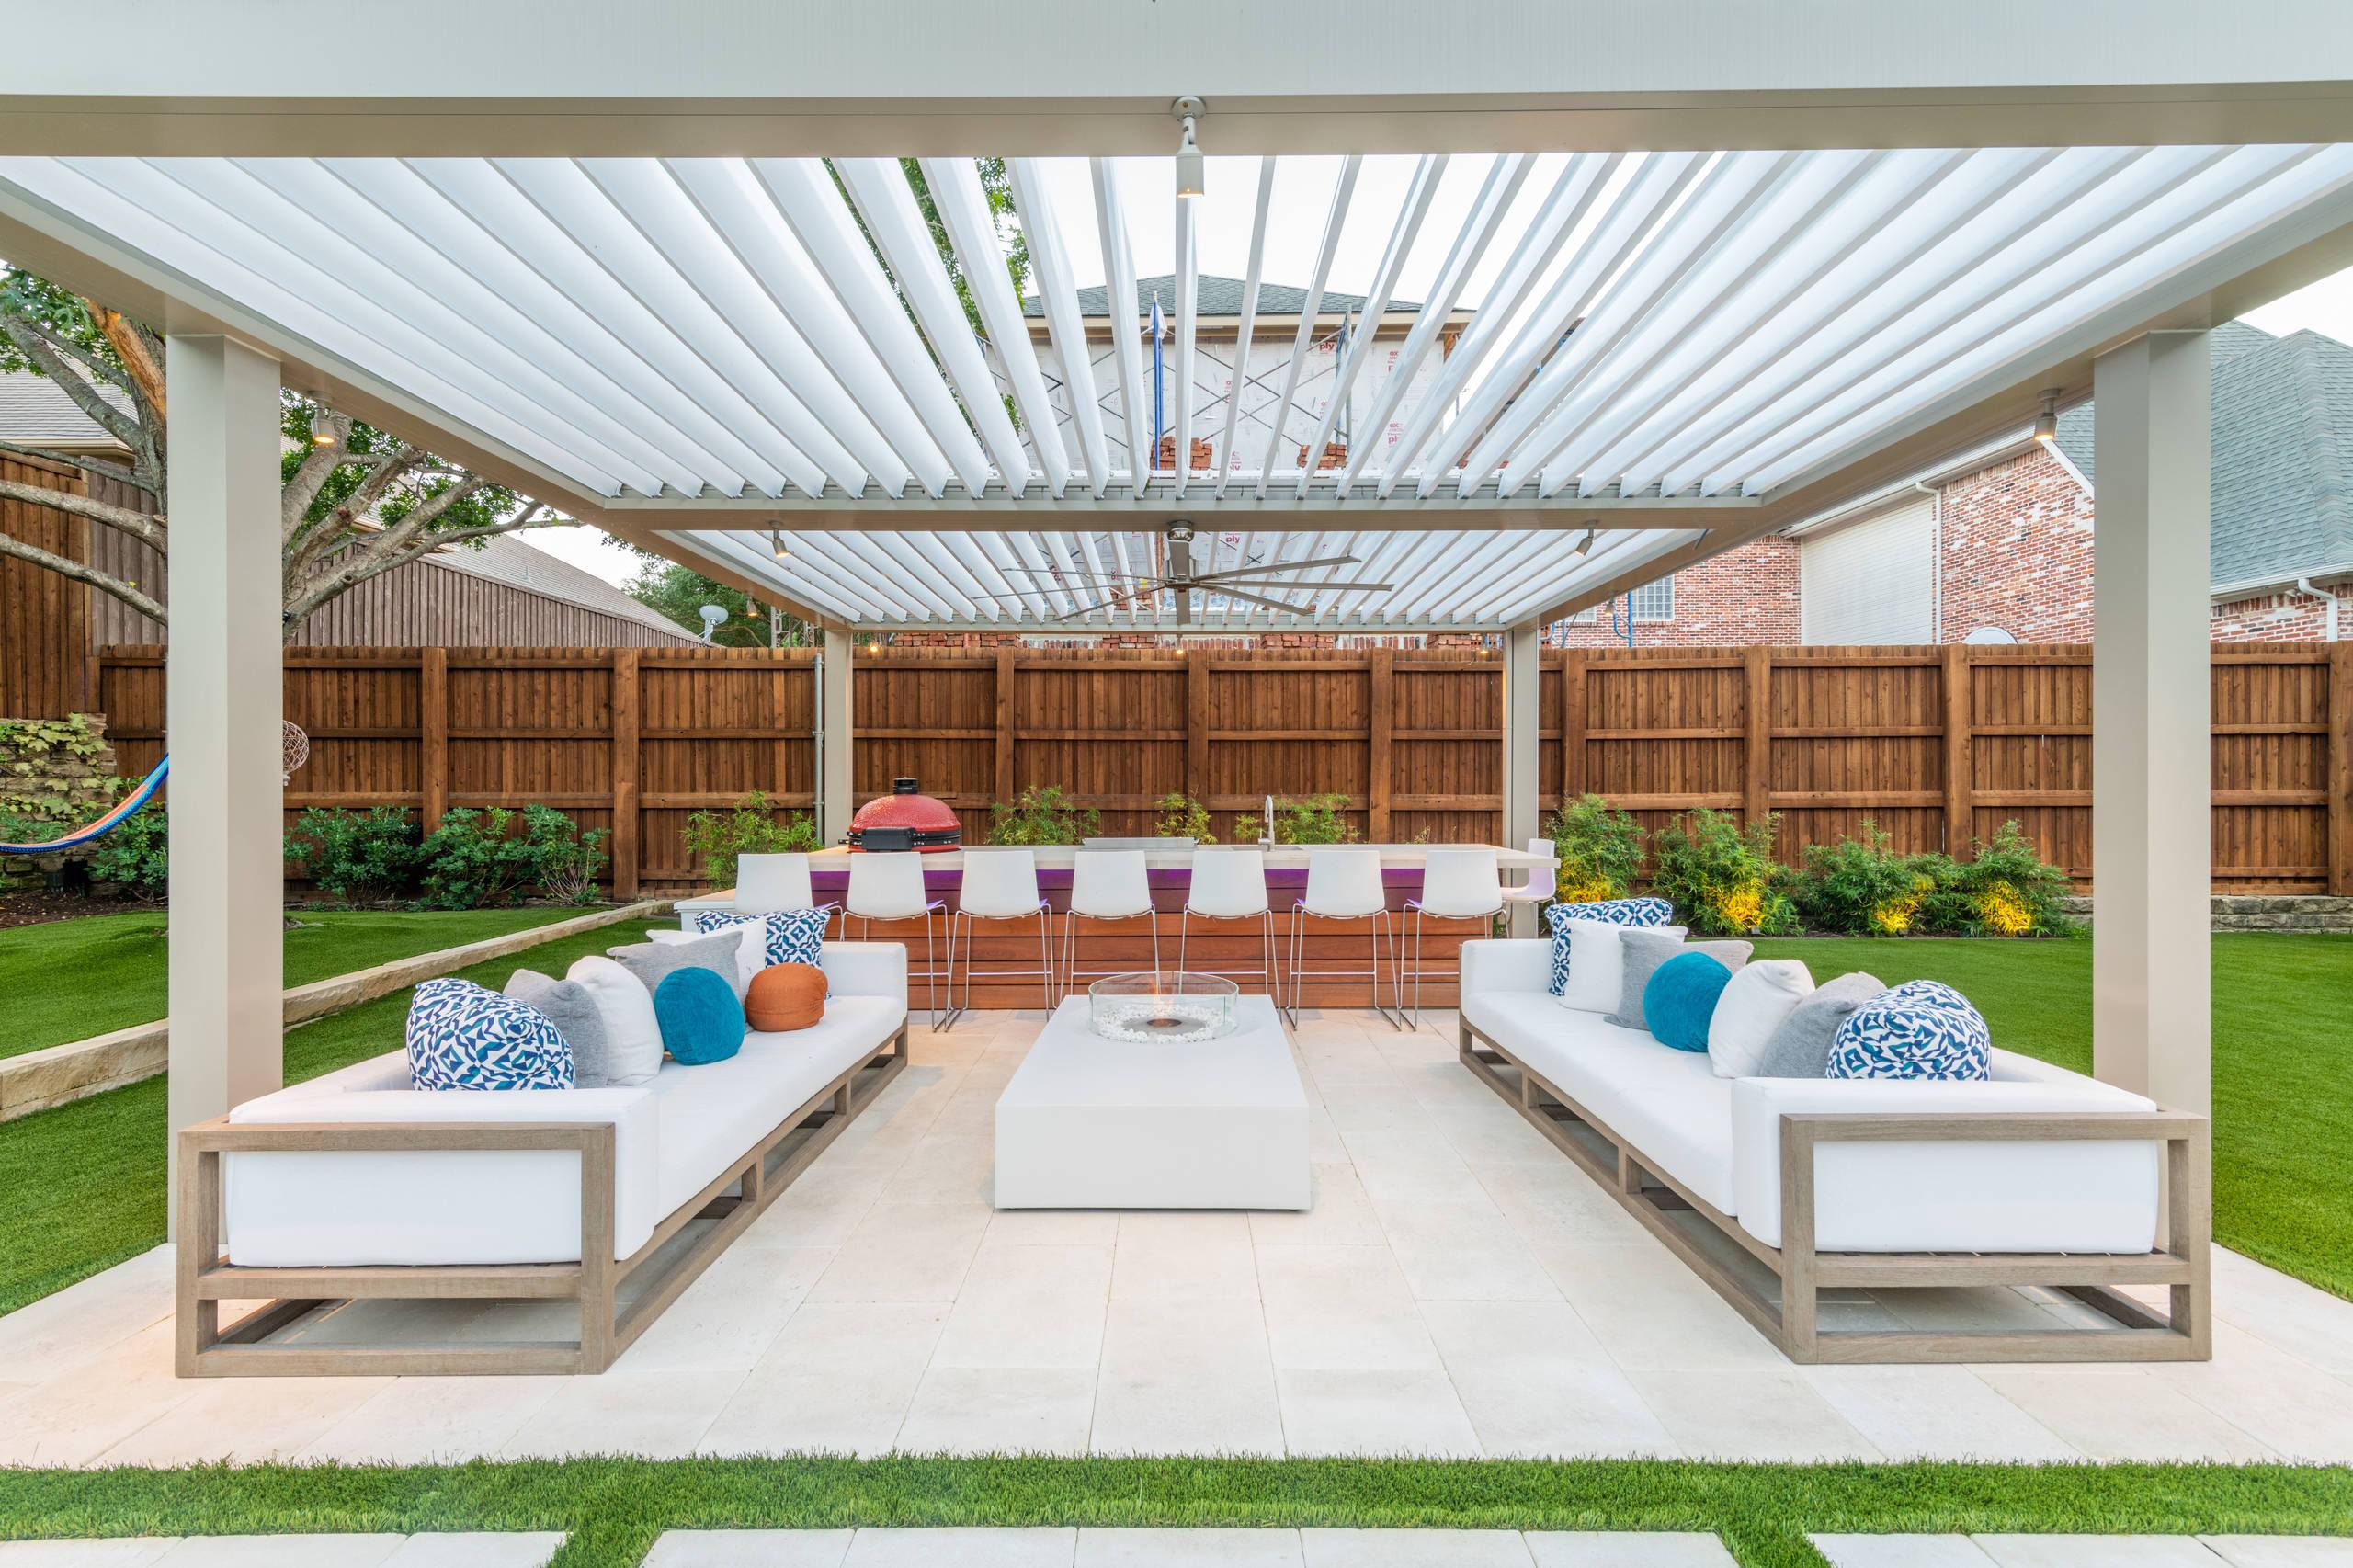 Cobalt blue cushions to spruce up the outdoor seating area (from Houzz)